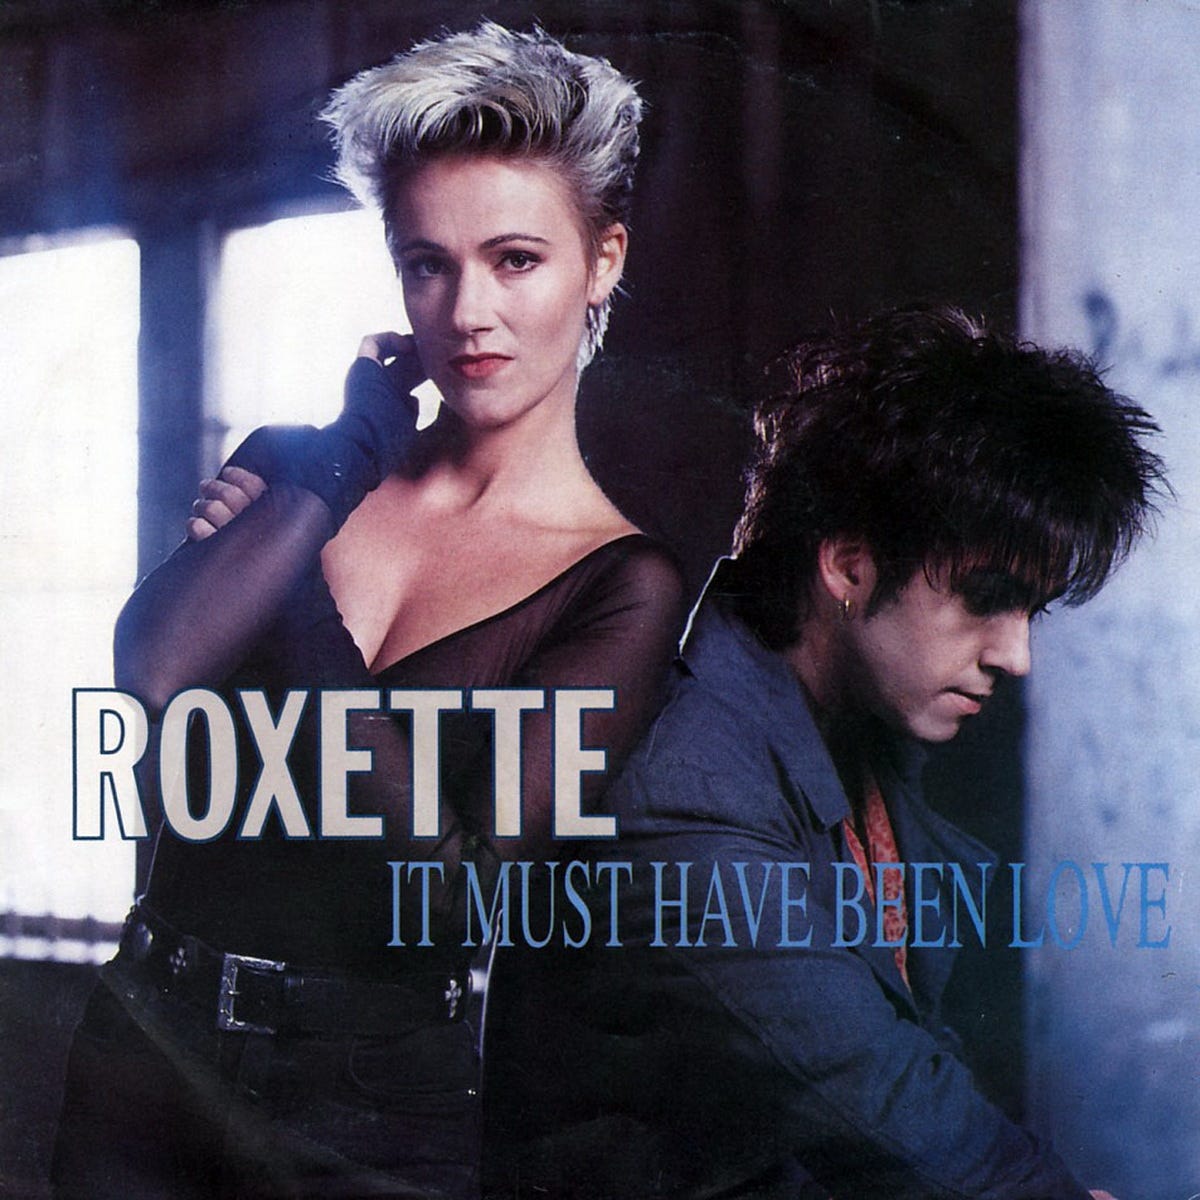 Roxette: It Must Have Been Love (Music Video 1990) - IMDb